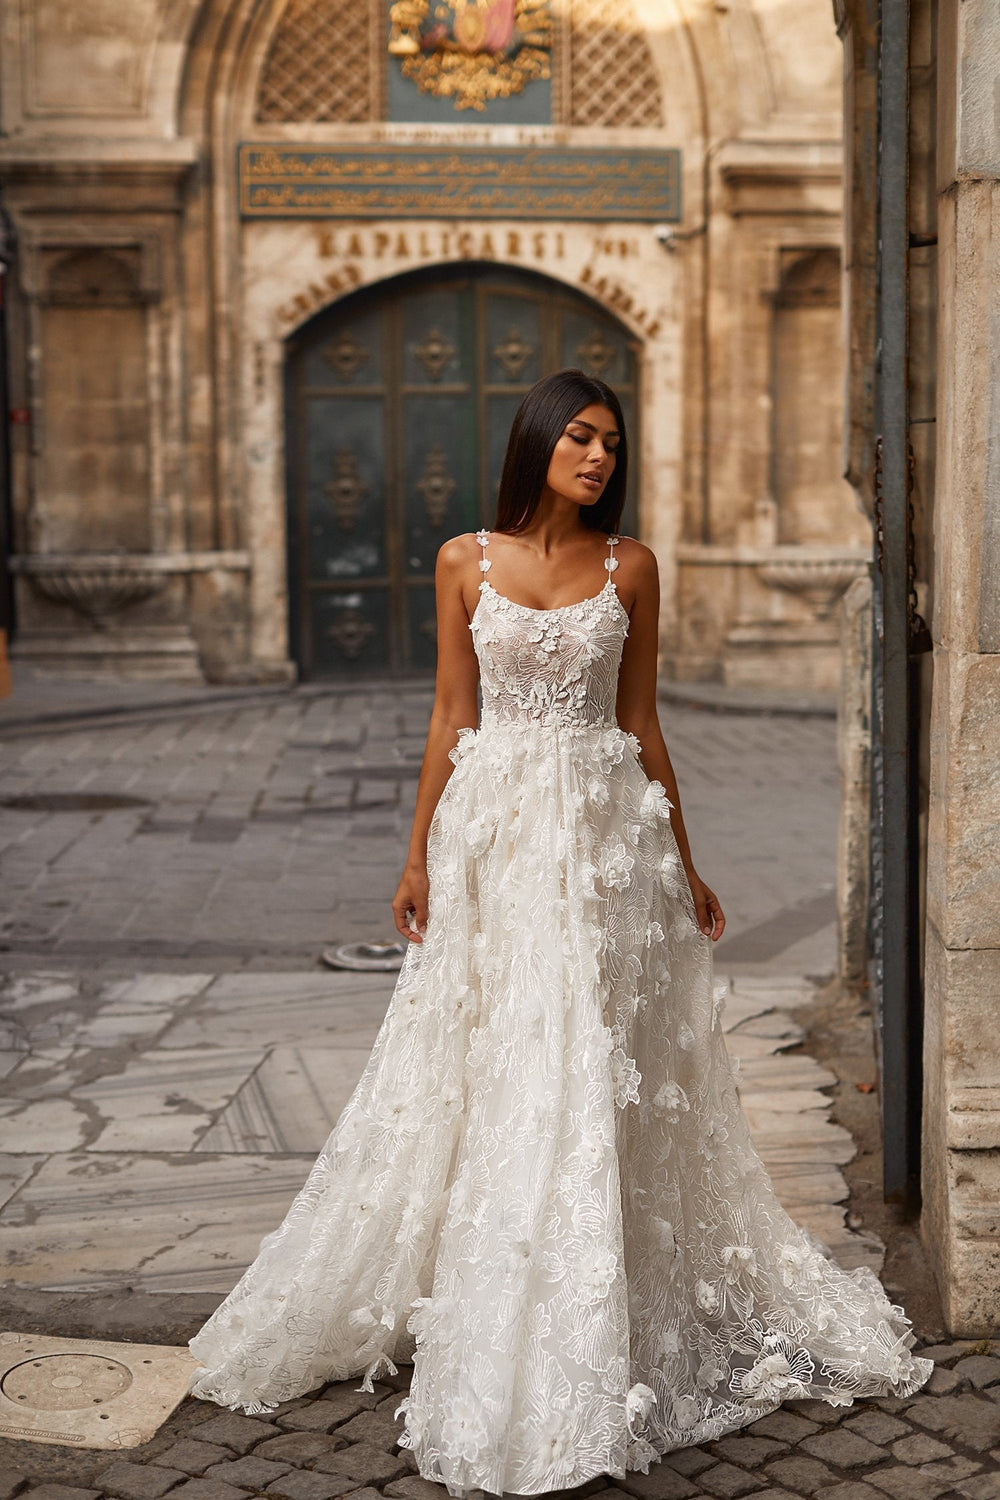 20 Best Long-Sleeved Wedding Dresses That Will Steal the Show